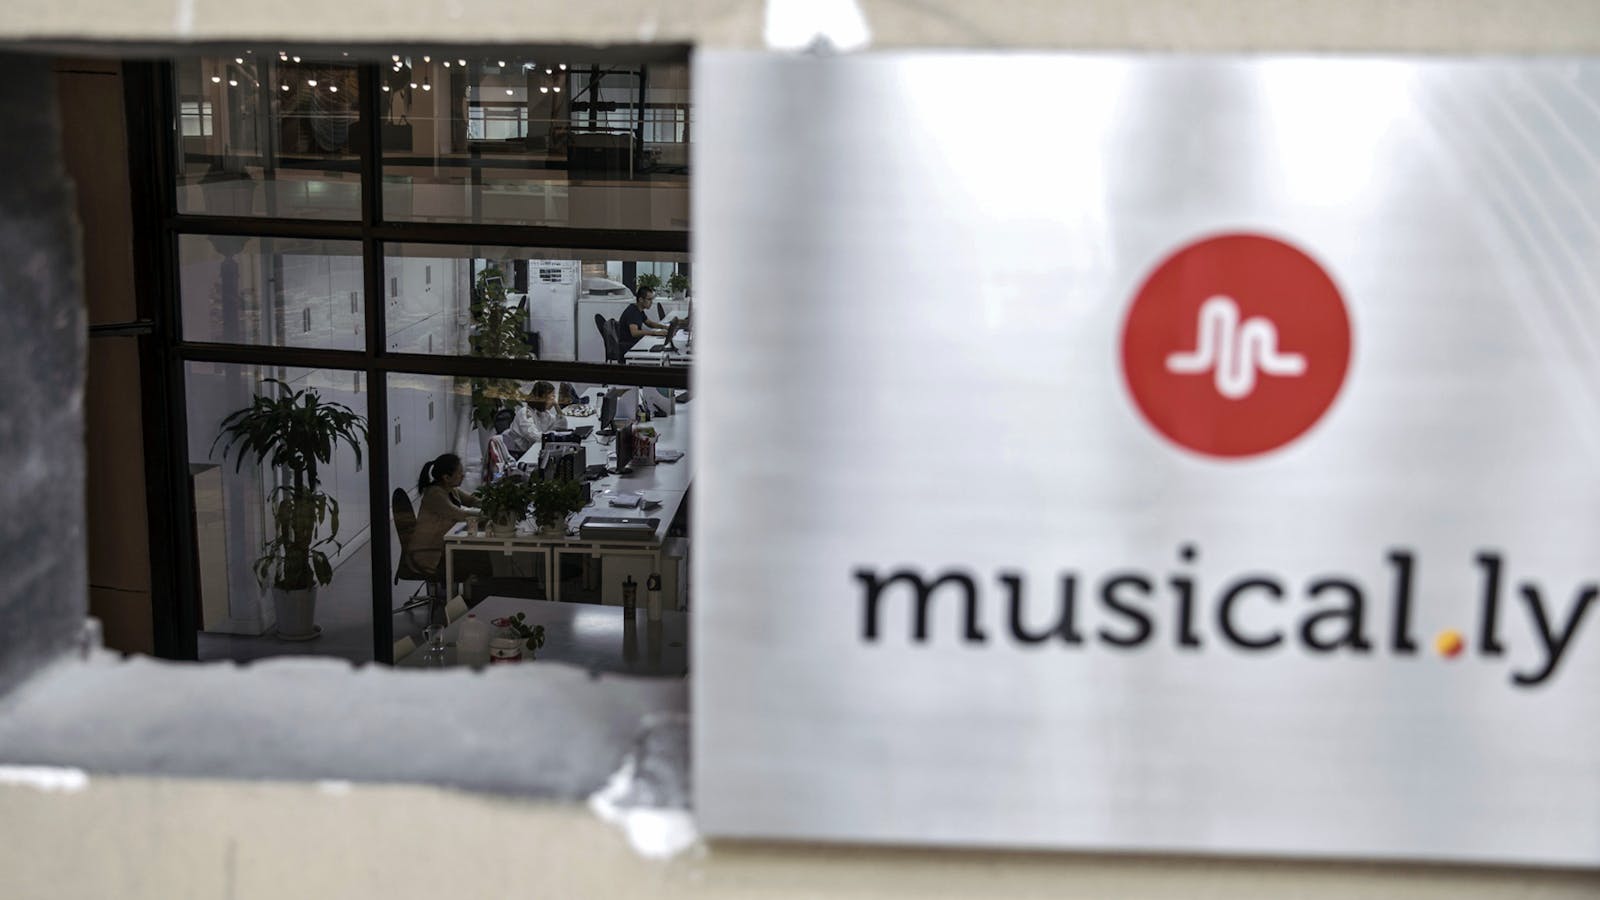 Musical.ly's Shanghai headquarters in 2016. Photo by Bloomberg.